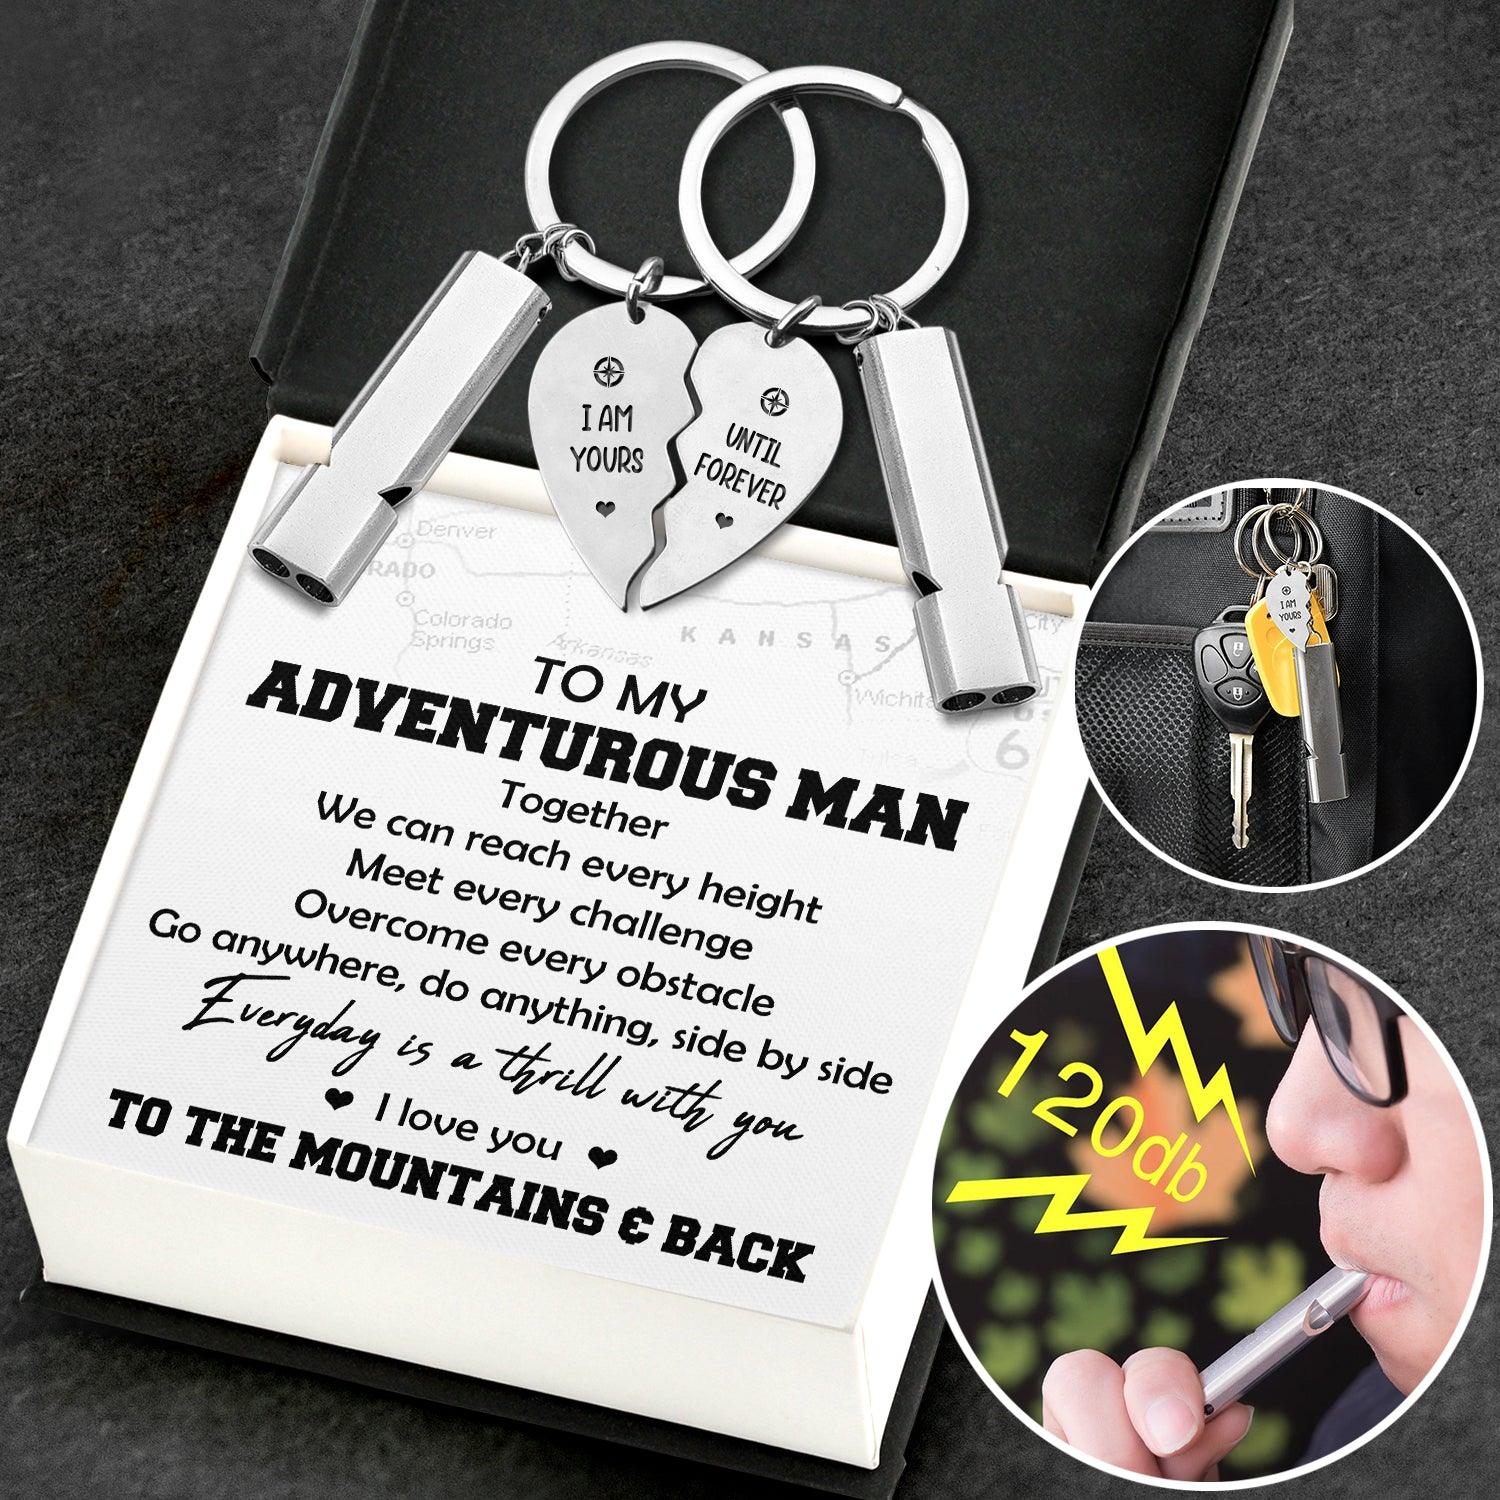 Couple Whistle Keychains - Hiking - To My Adventurous Man - Everyday Is A Thrill With You - Augkzh26005 - Gifts Holder